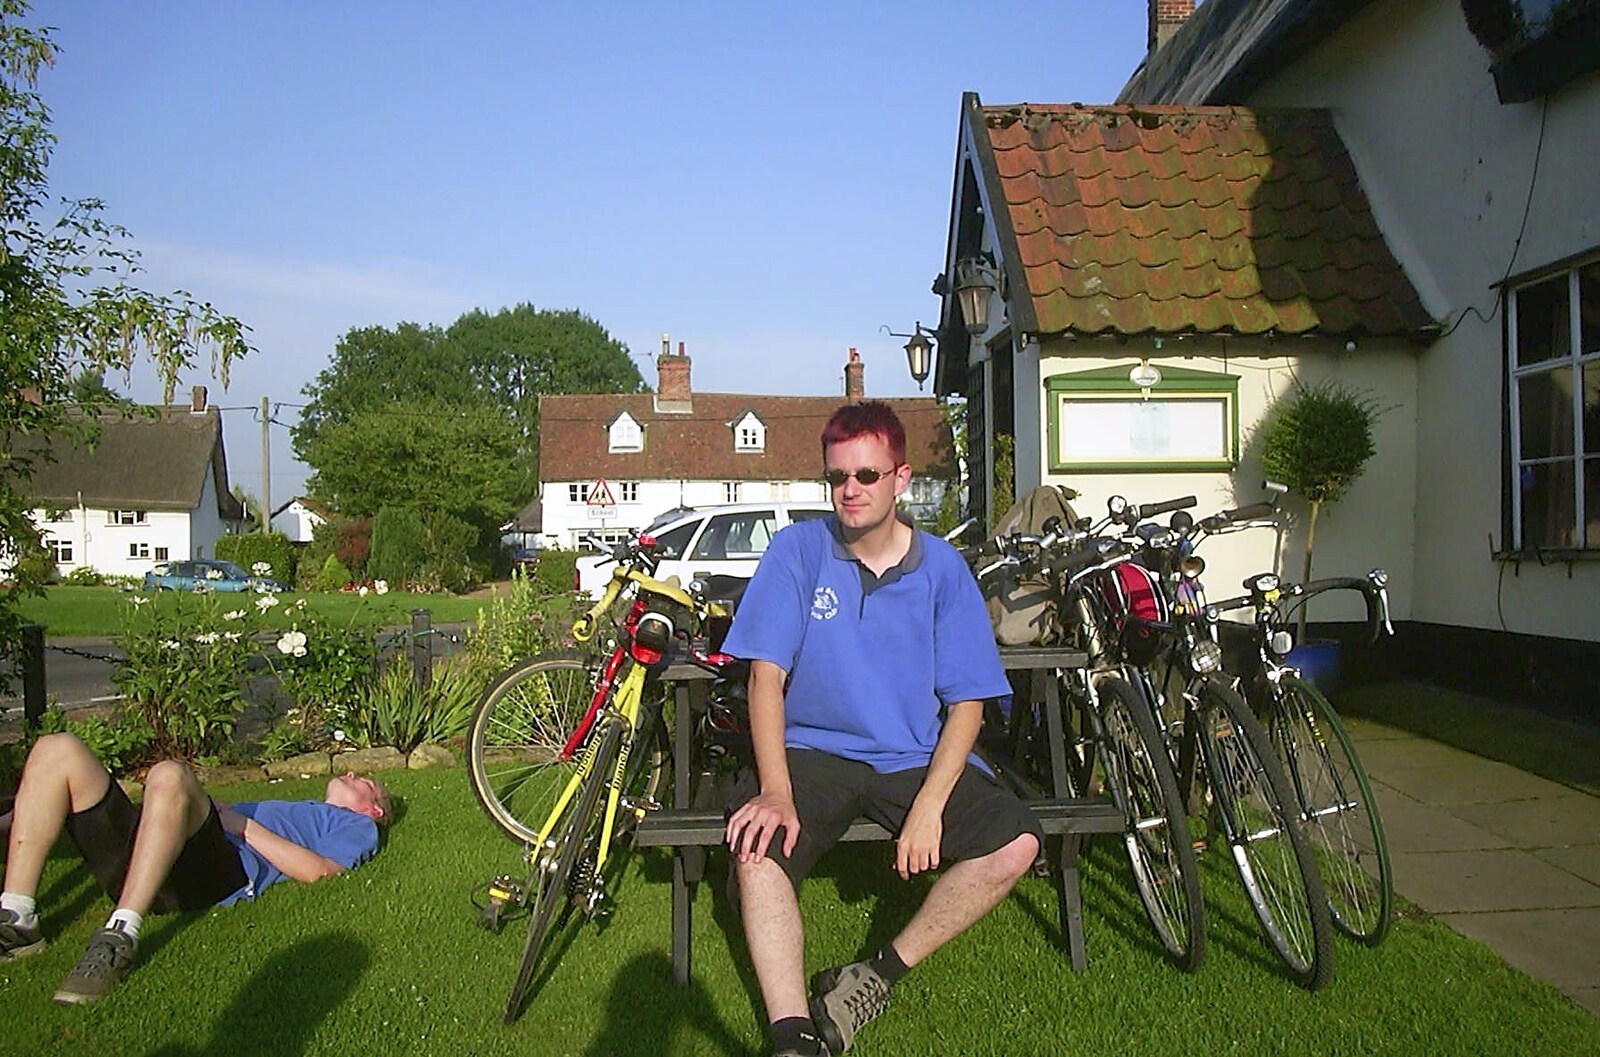 The BSCC Annual Sponsored Bike Ride, The Cottage, Thorpe St. Andrew, Norwich  - 18th July 2004: Nosher on a bench